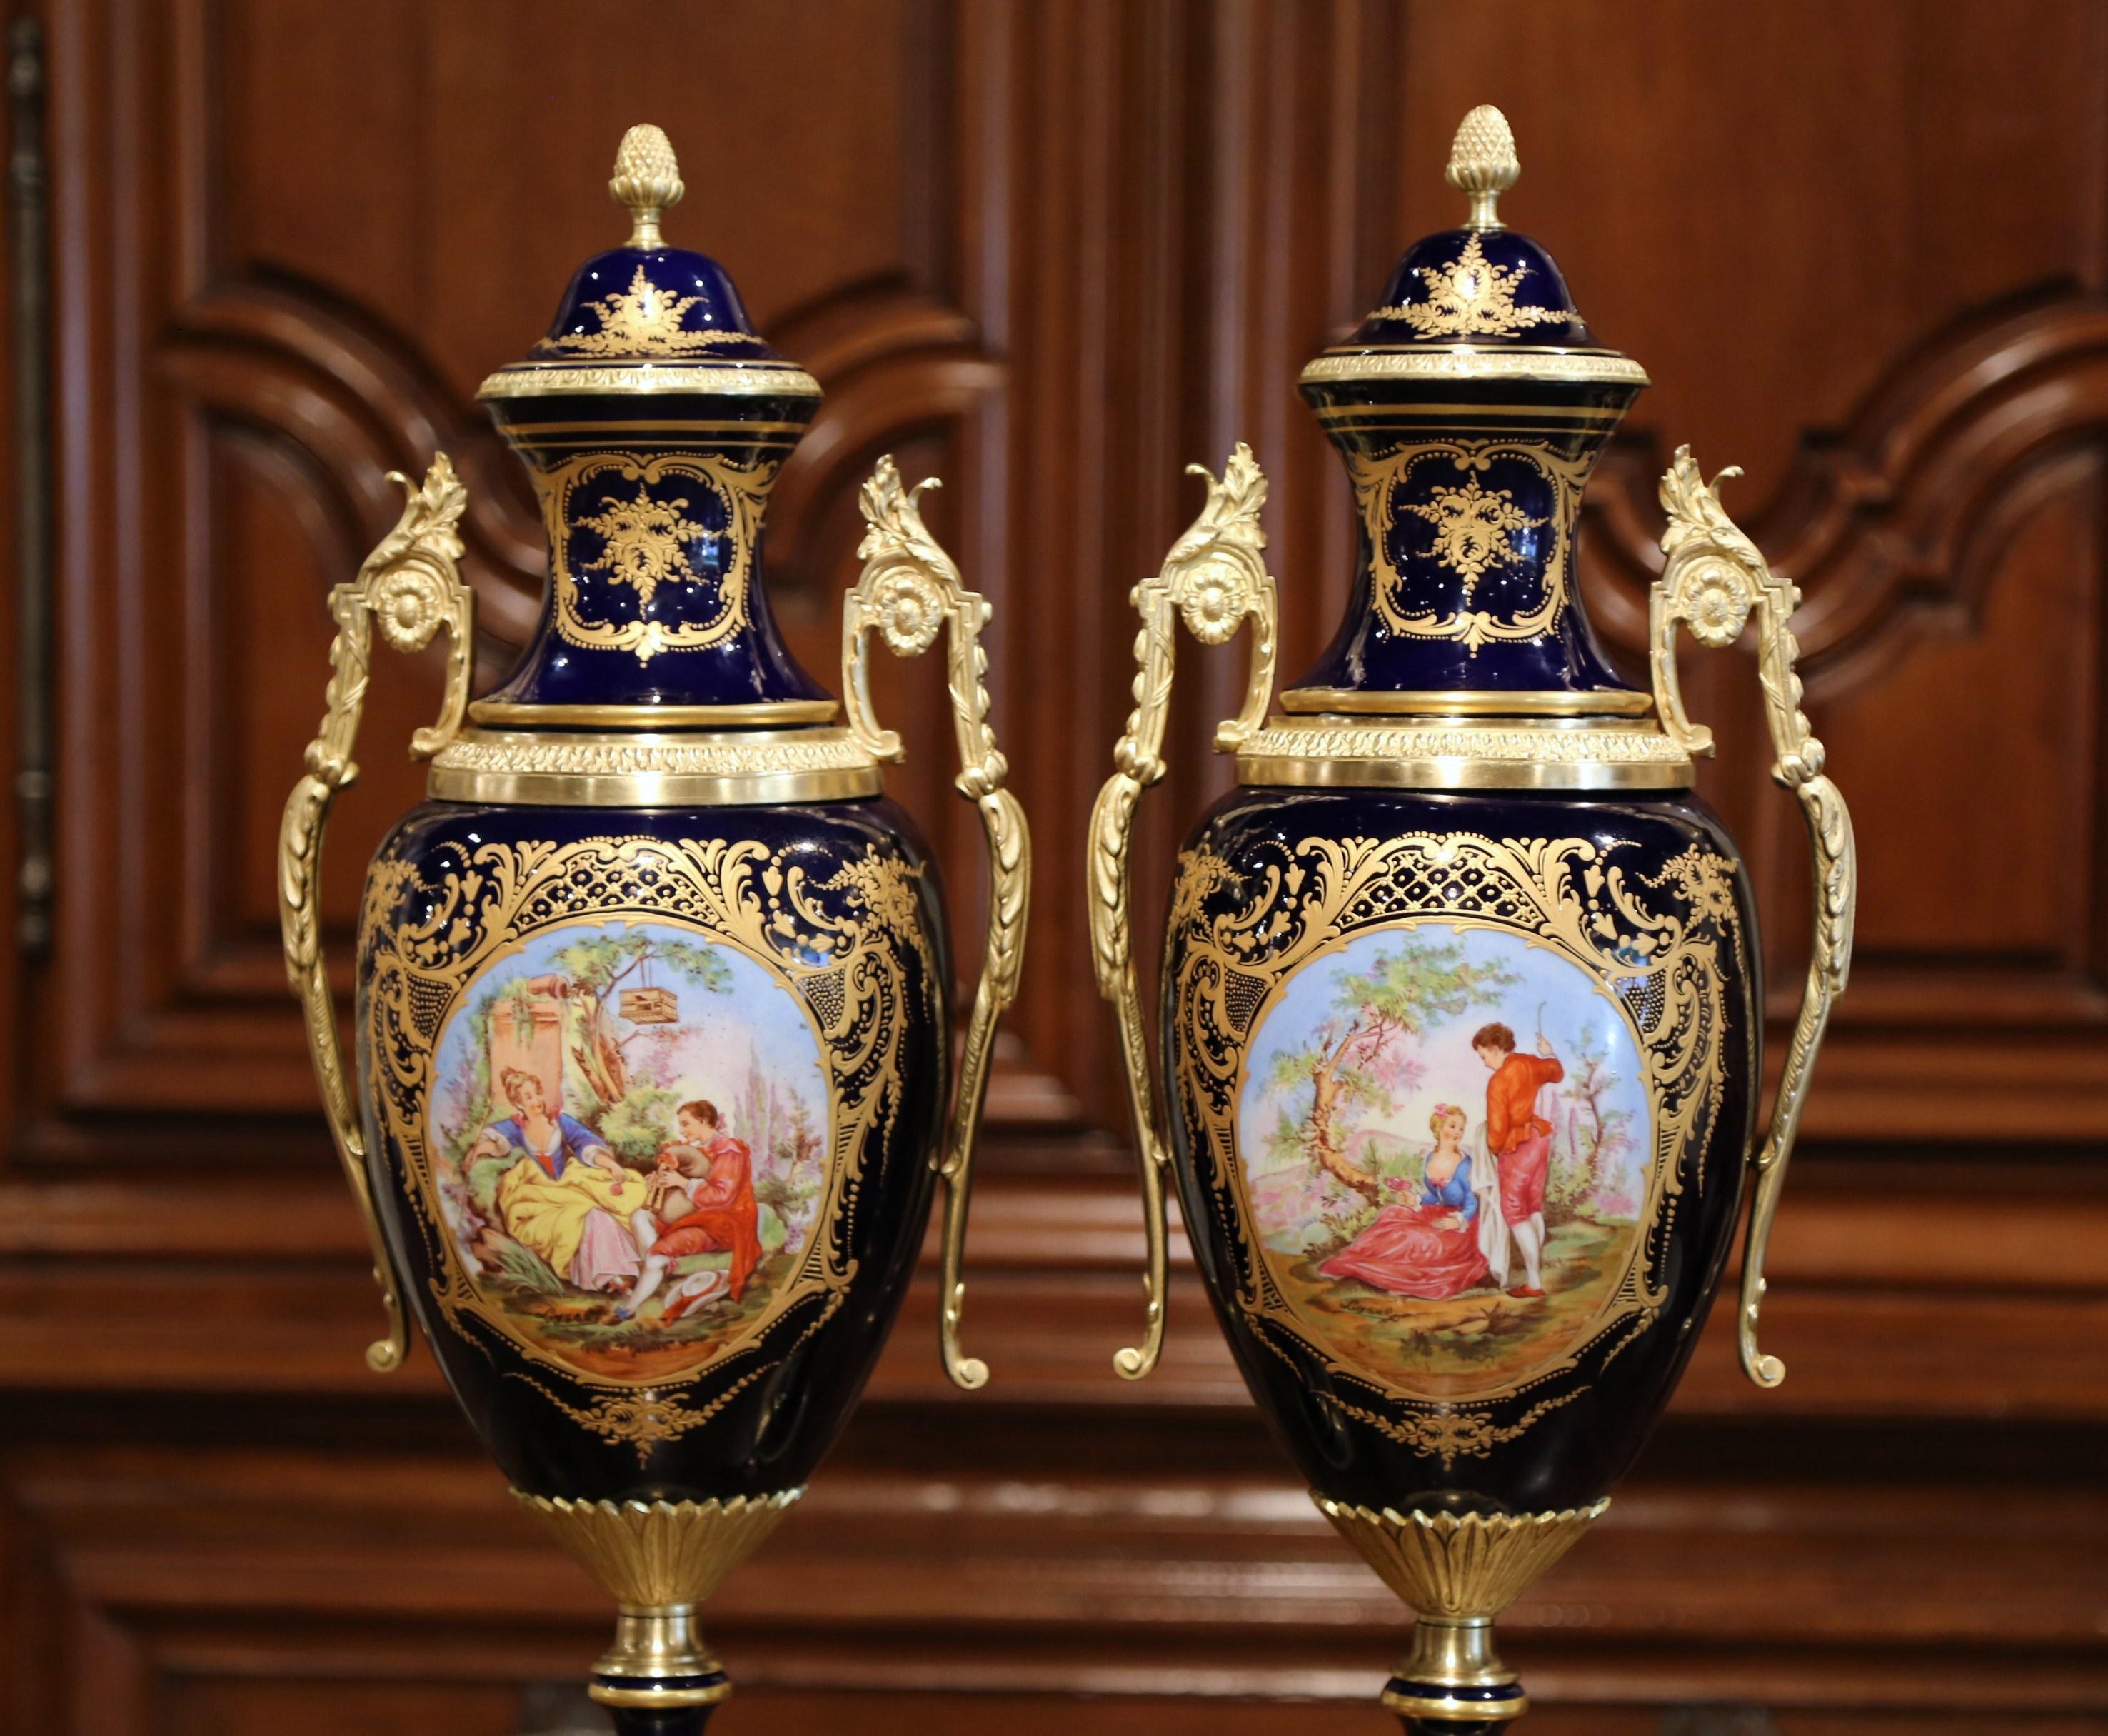 Hand-Crafted Pair of Mid-20th Century French Blue Royal Porcelain and Bronze Sèvres Urns